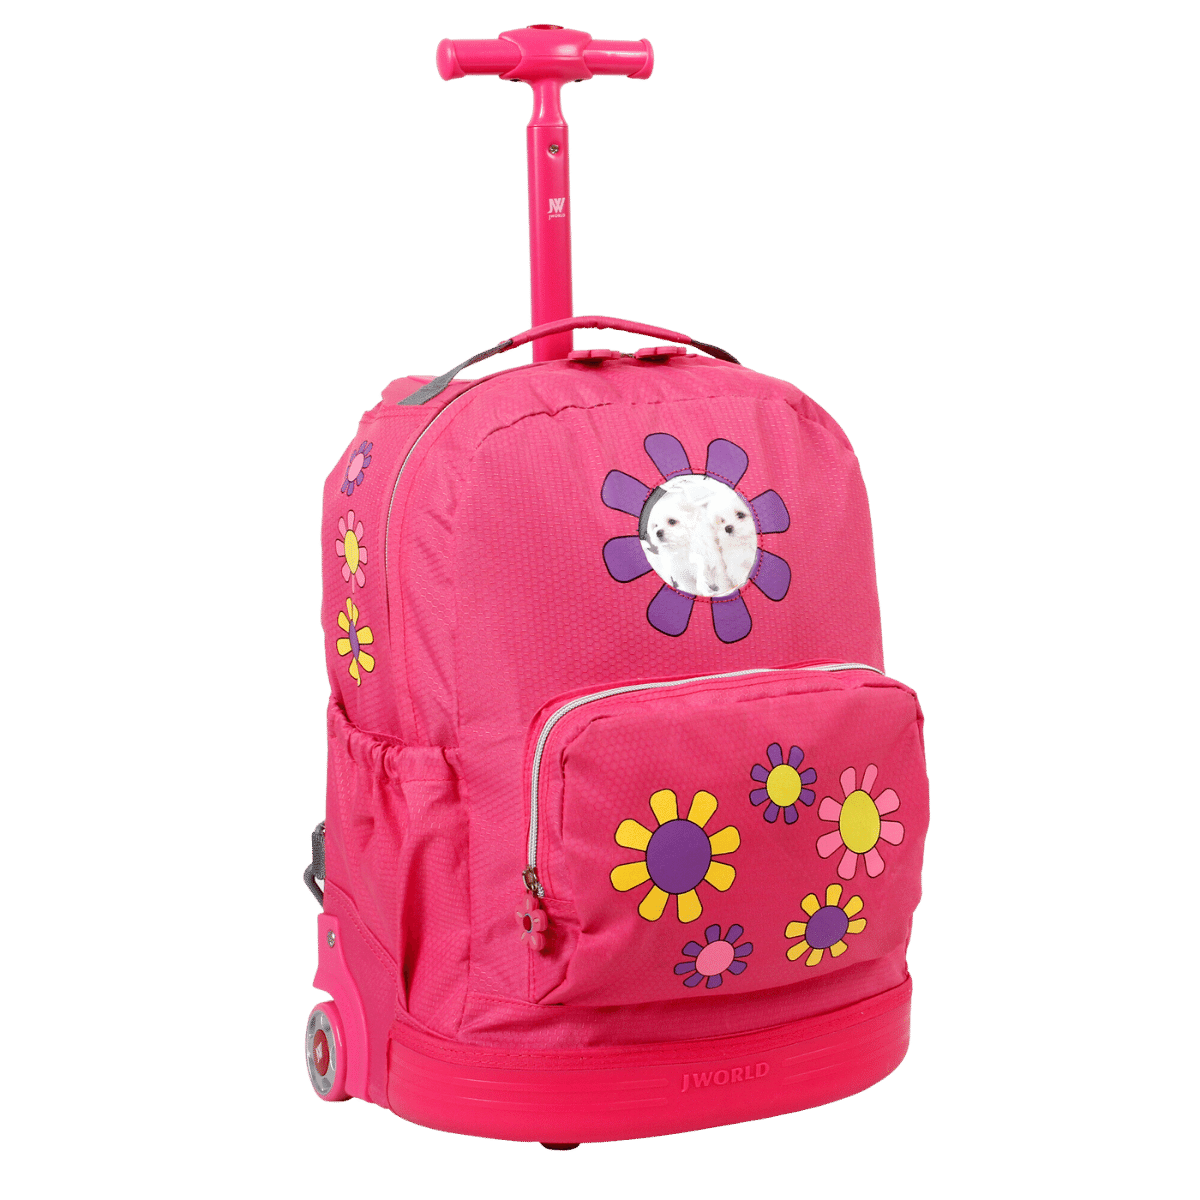 13 roller backpacks for school made to ease kids' back pain - Reviewed